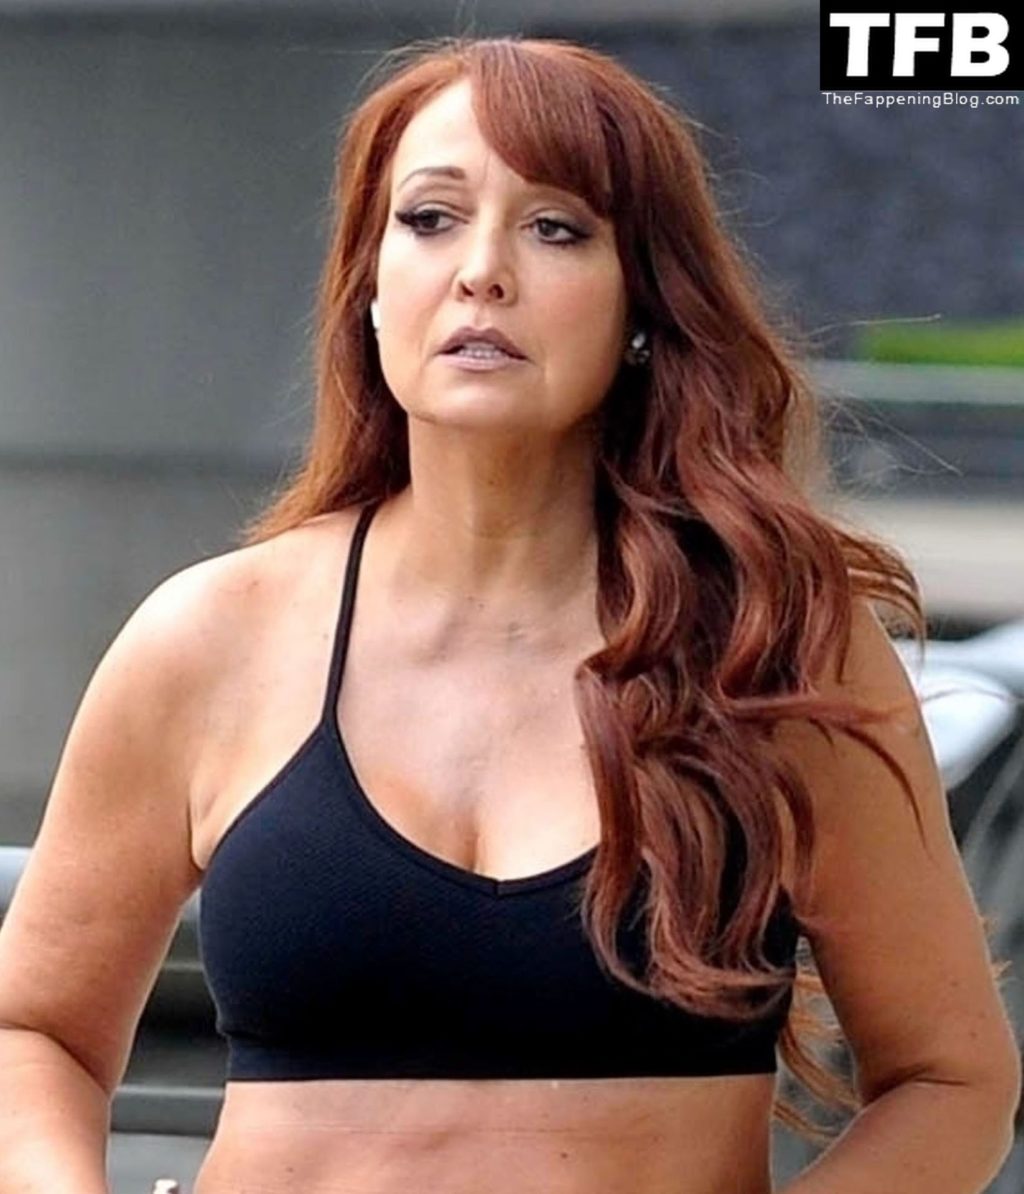 Amy Anzel Sexy The Fappening Blog 12 1024x1194 - Amy Anzel Puts on a Busty Display Working Out at Media City in Manchester (13 Photos)